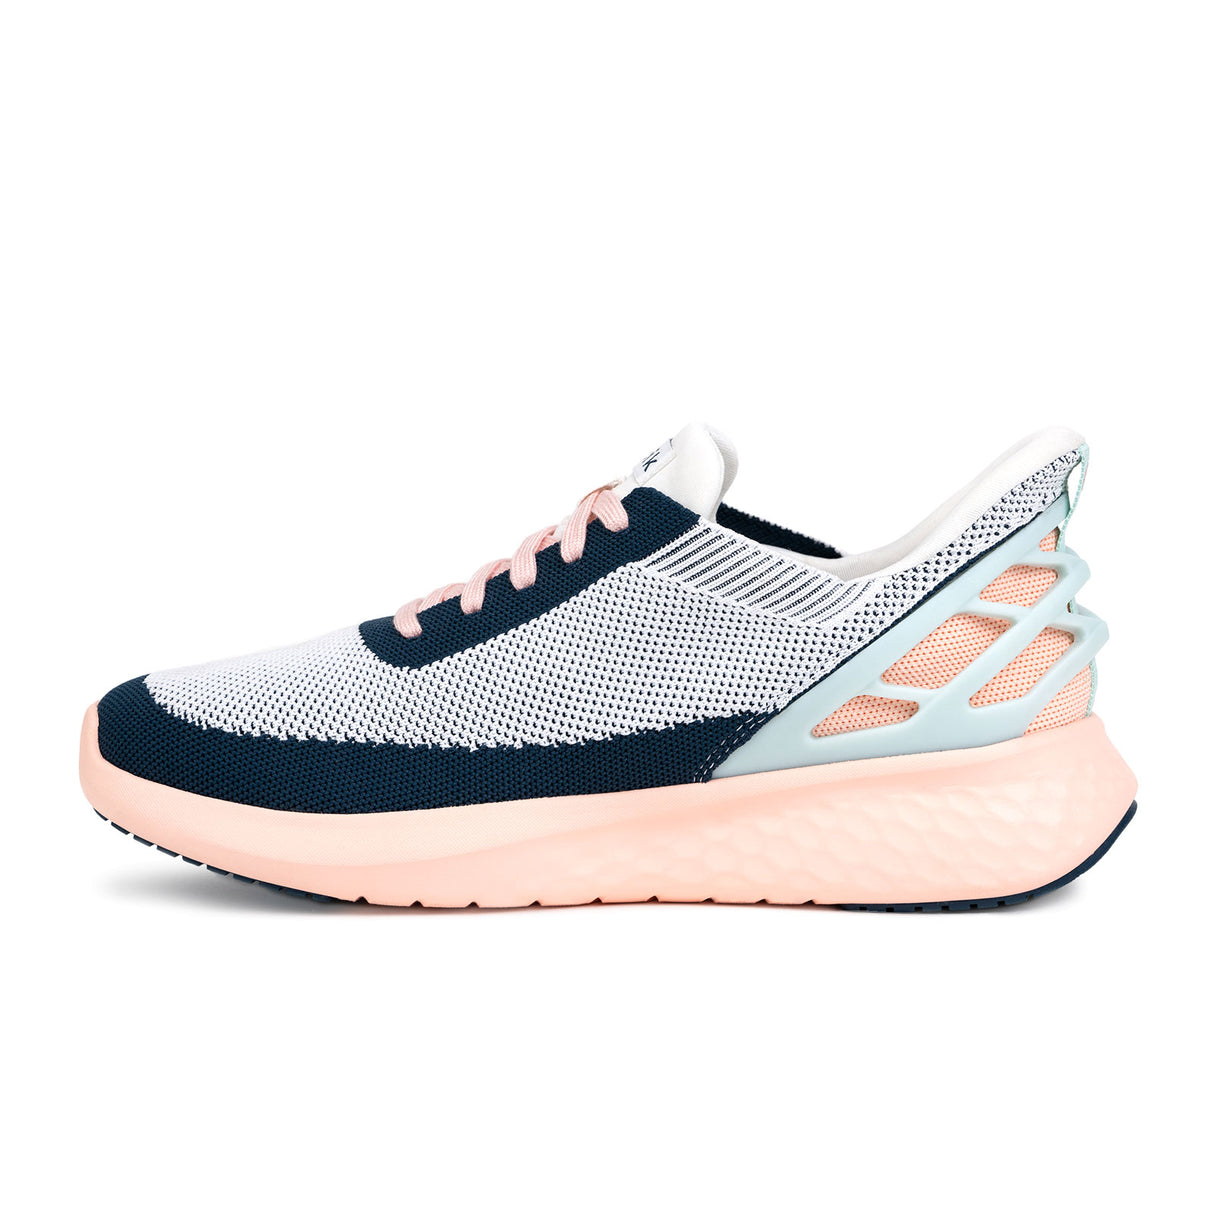 Kizik Athens Sneaker (Unisex) - Bahama Athletic - Casual - Lace Up - The Heel Shoe Fitters